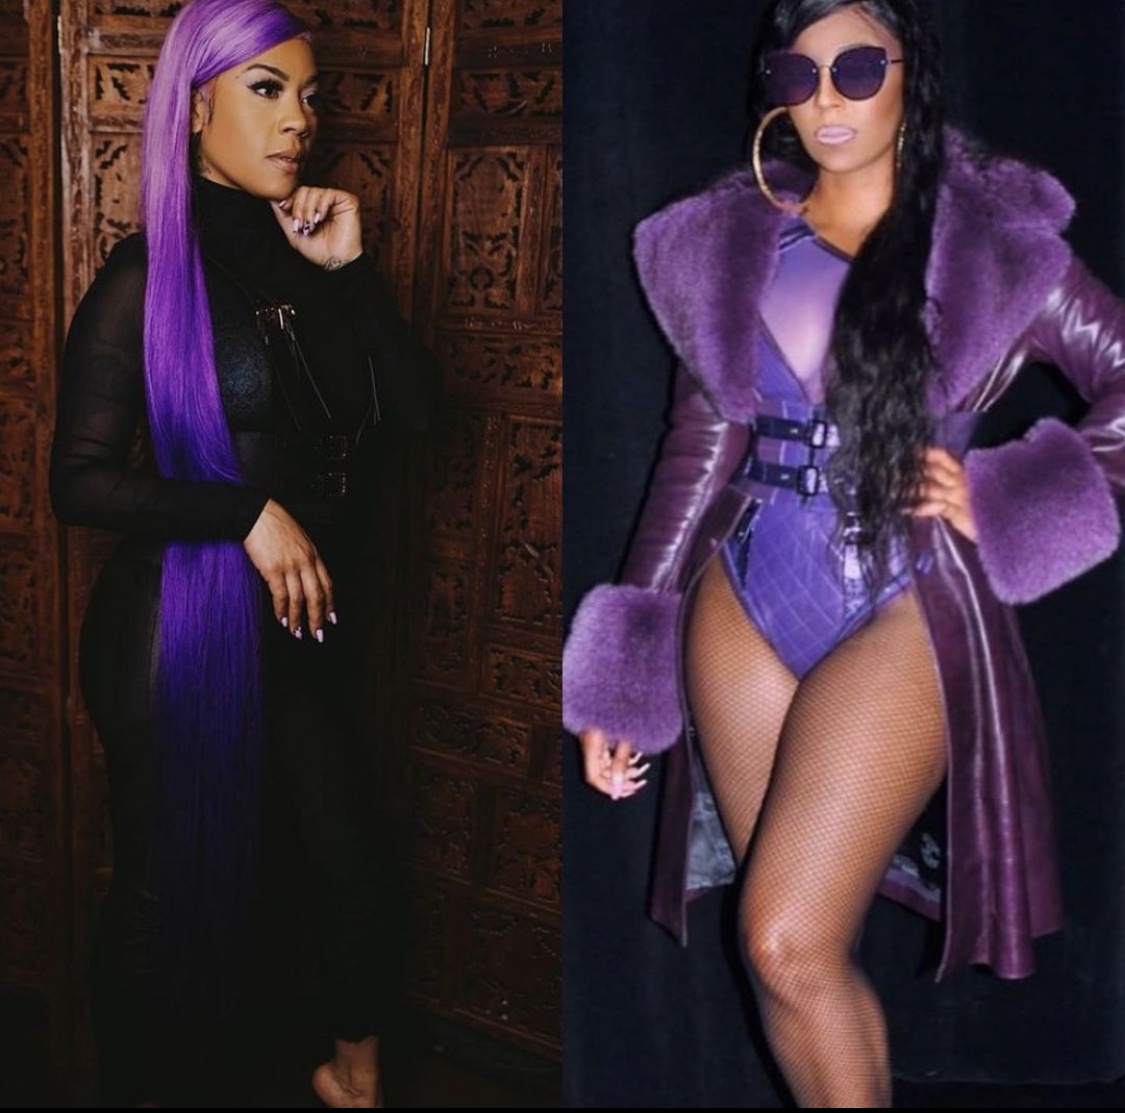 Keyshia Cole's boobs have dominated Twitter, during her #Verzuz battle,  with Ashanti, all night, as fans have joked about wanting to see her titties  pop out, and others comment on how good